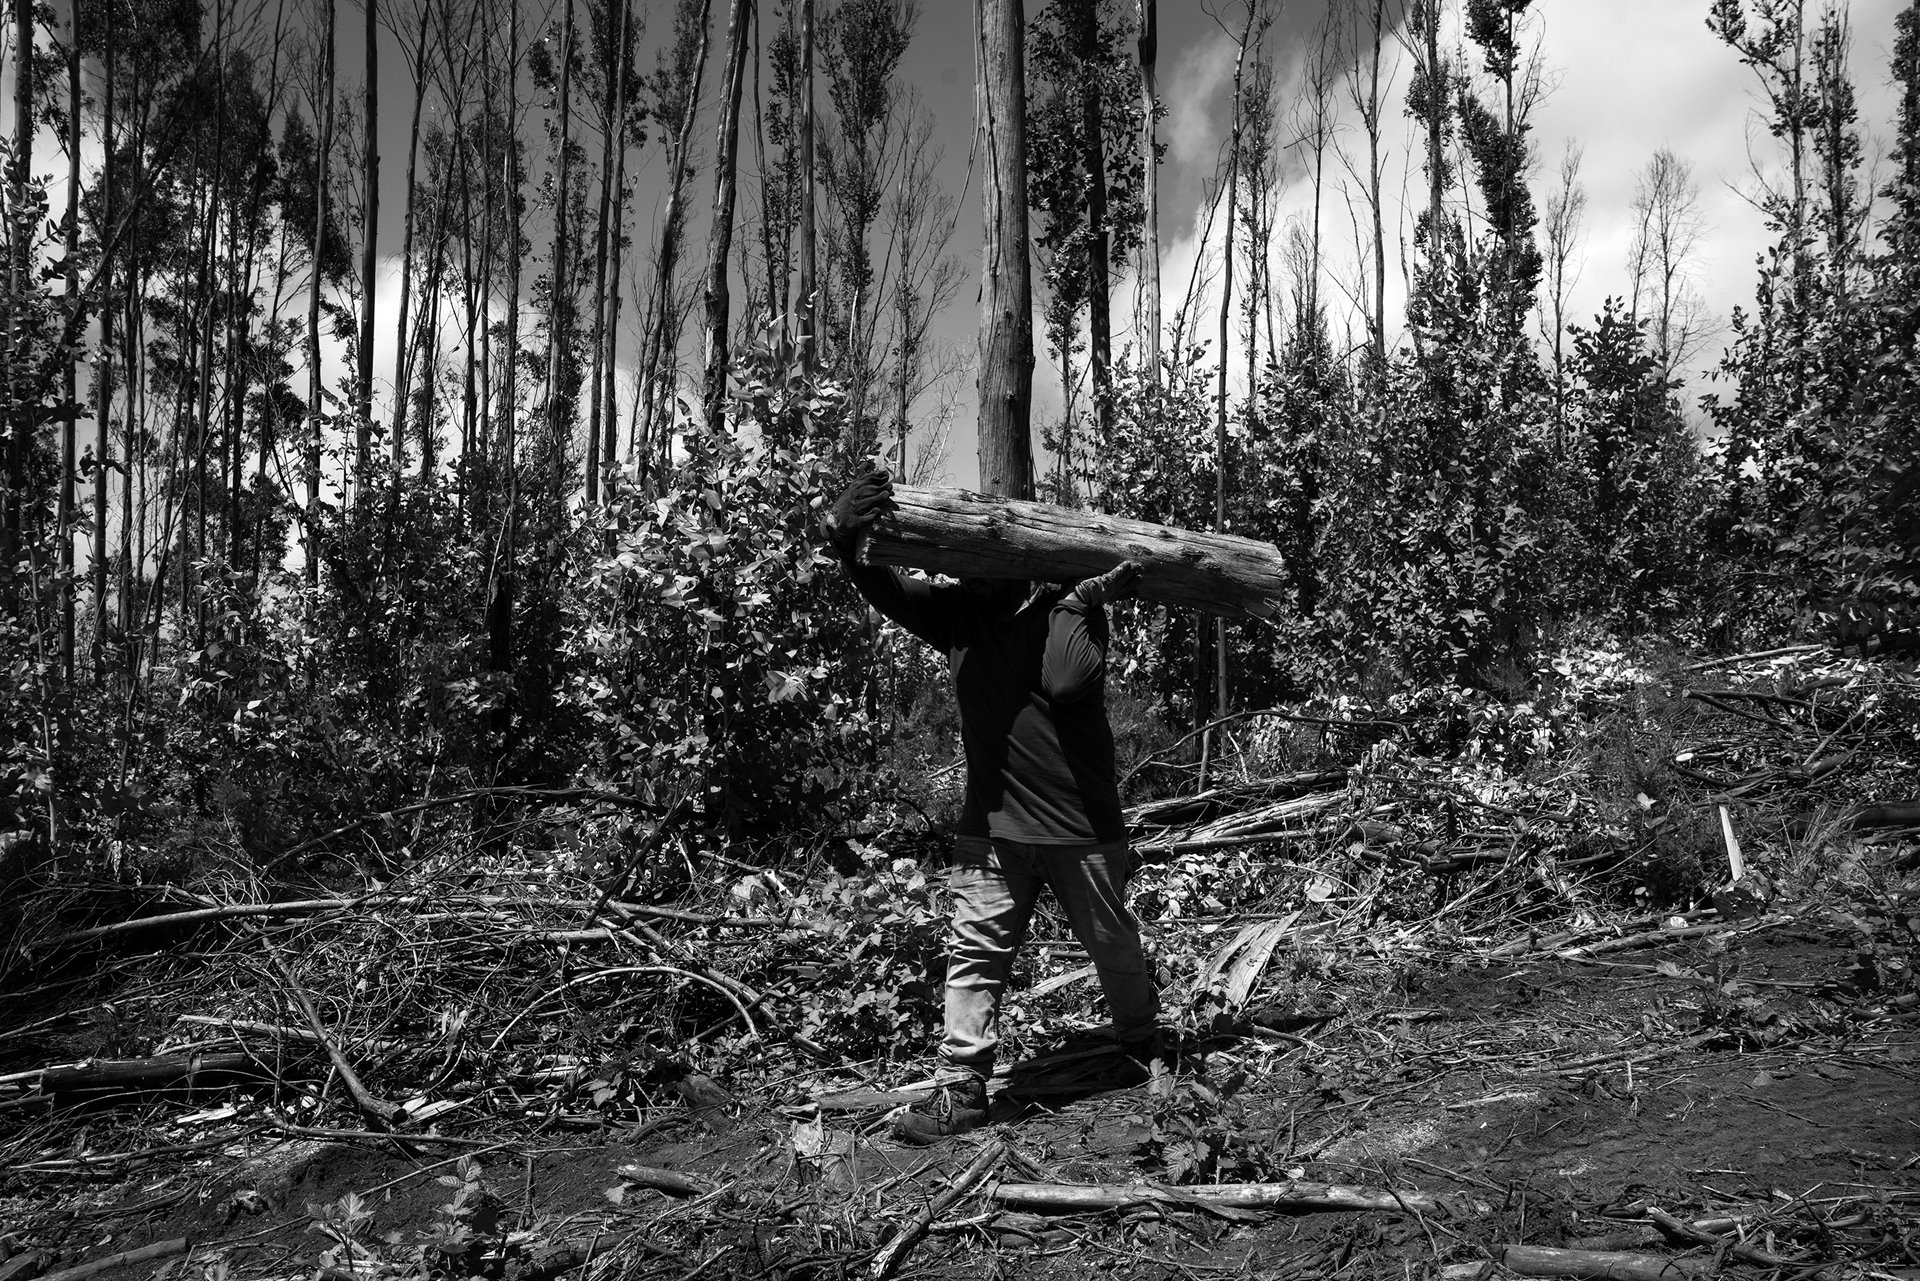 A young Mapuche man carries a eucalyptus log in Pailahueque, Araucanía, Chile. Communities who recover lands that were in the hands of forestry companies use the cultivated wood to build houses and for firewood.